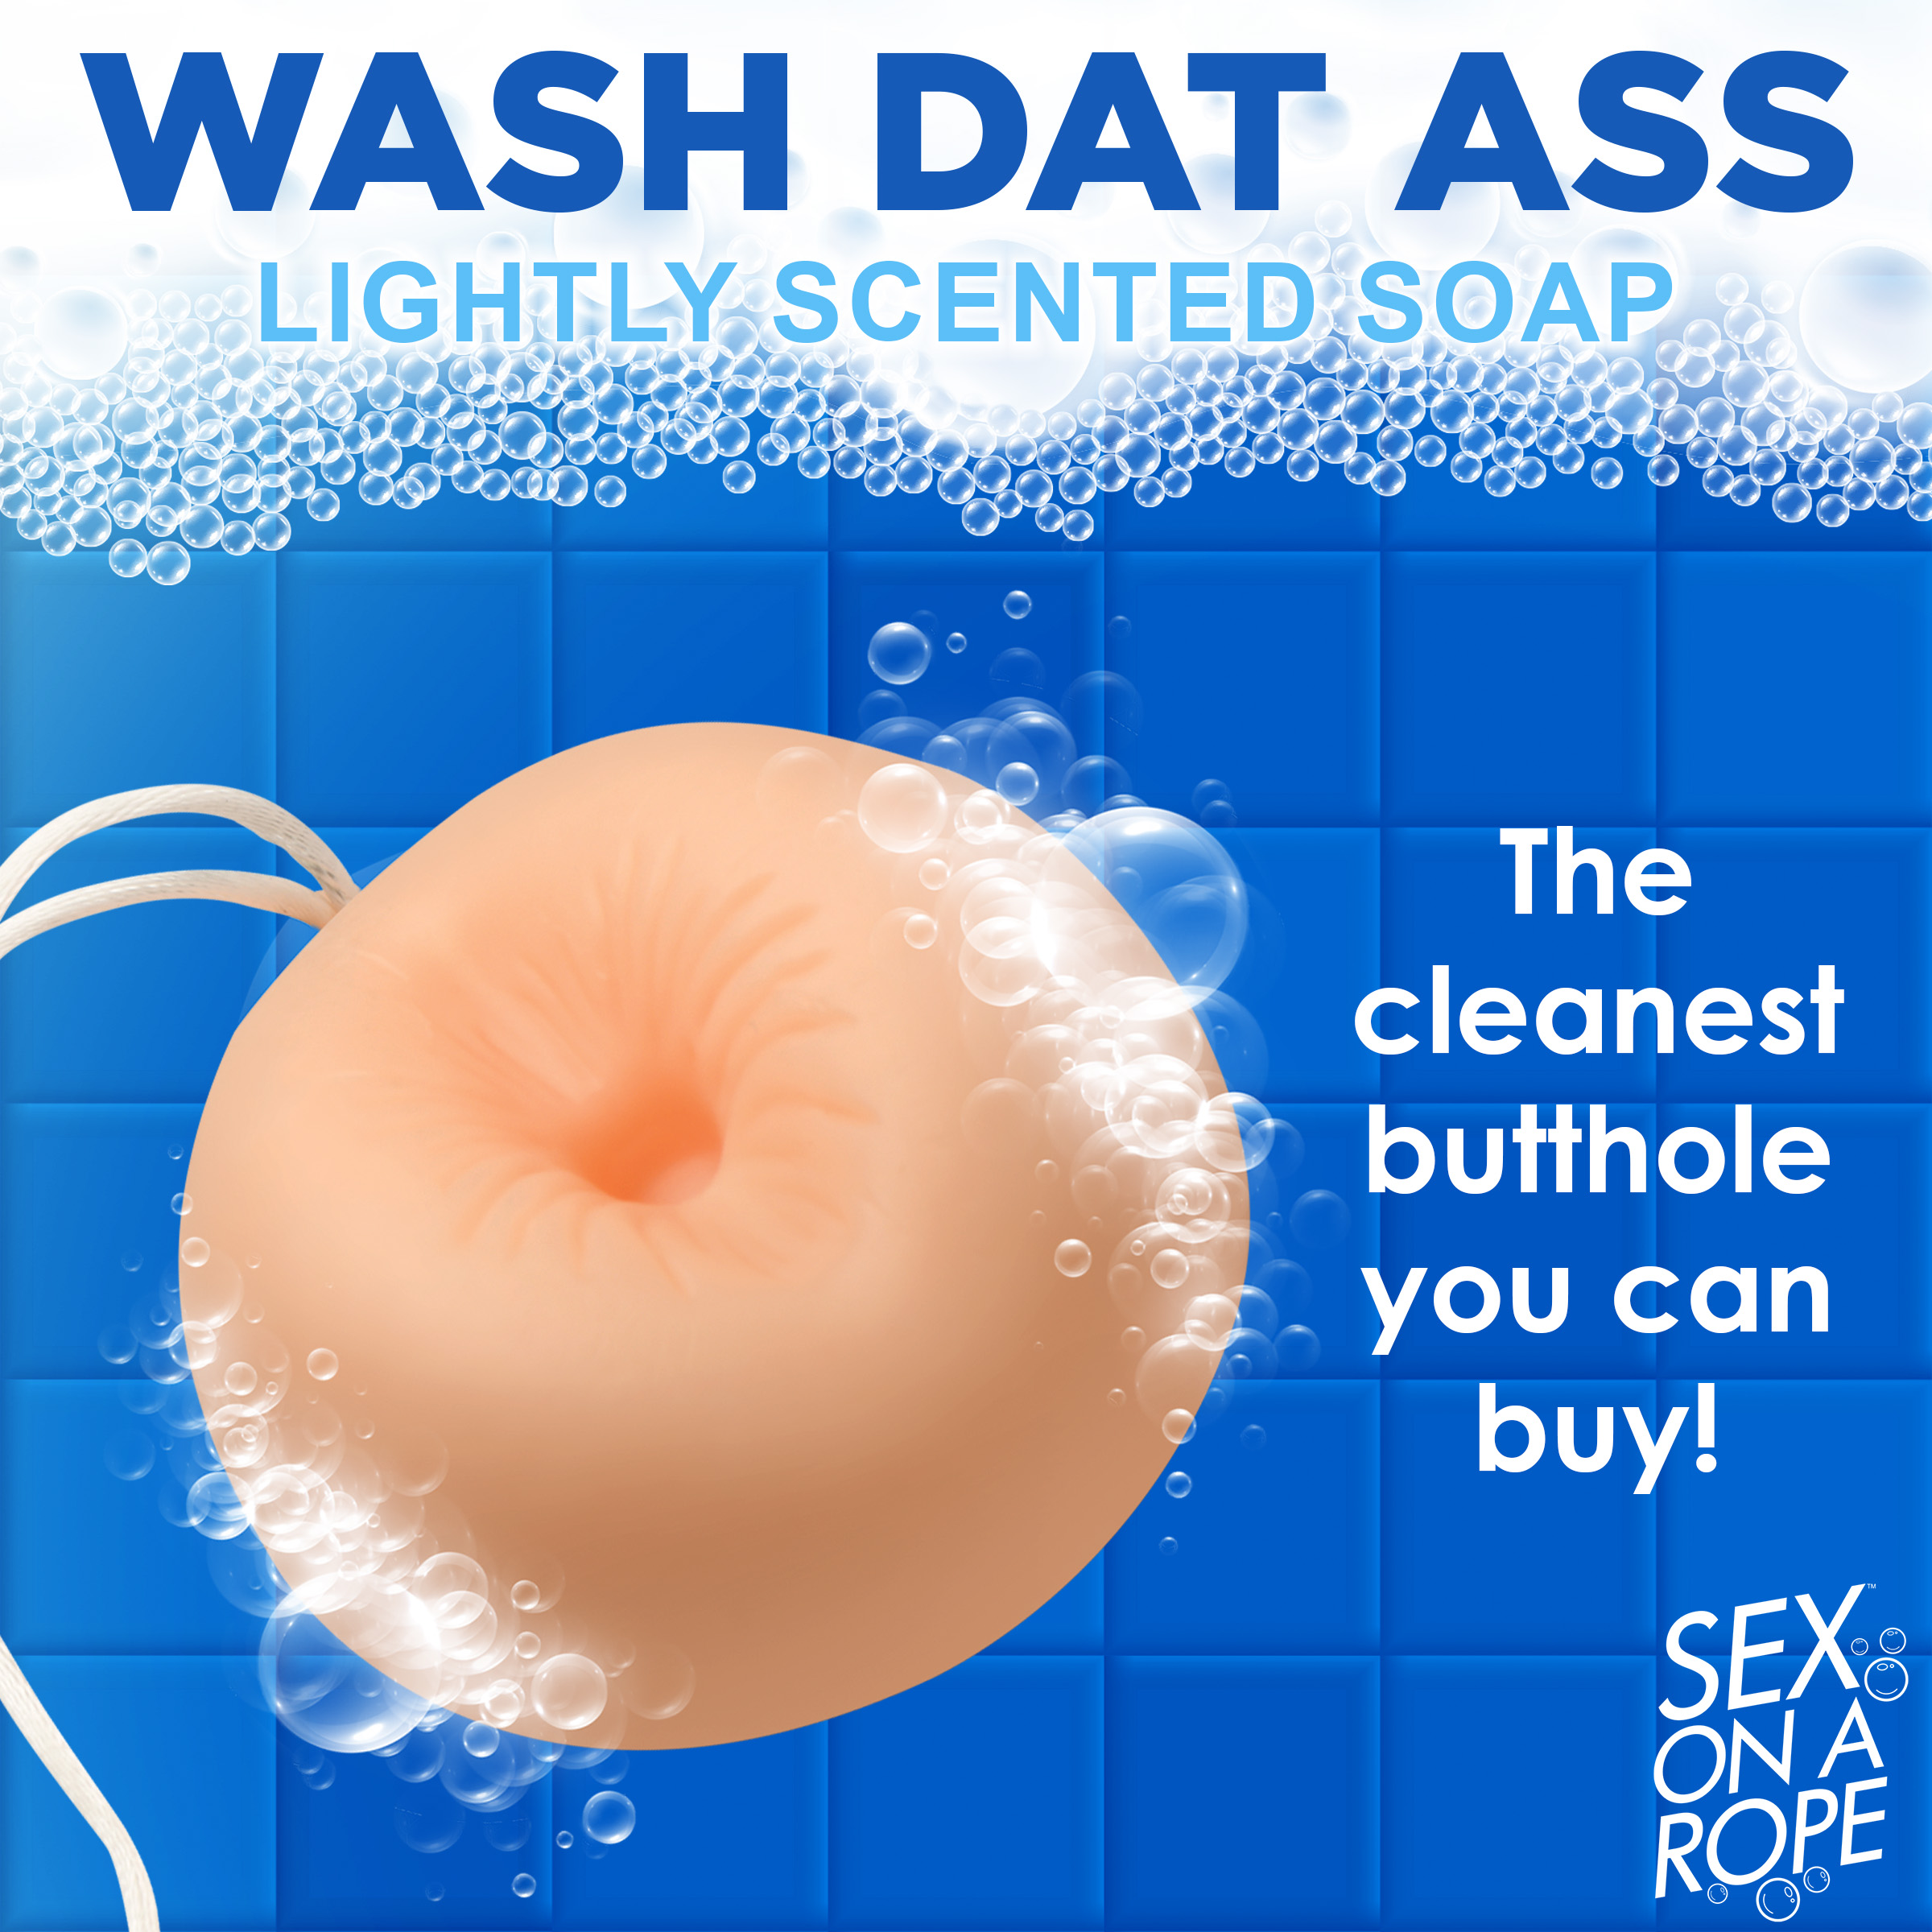 Wash Dat Ass Soap On A Rope